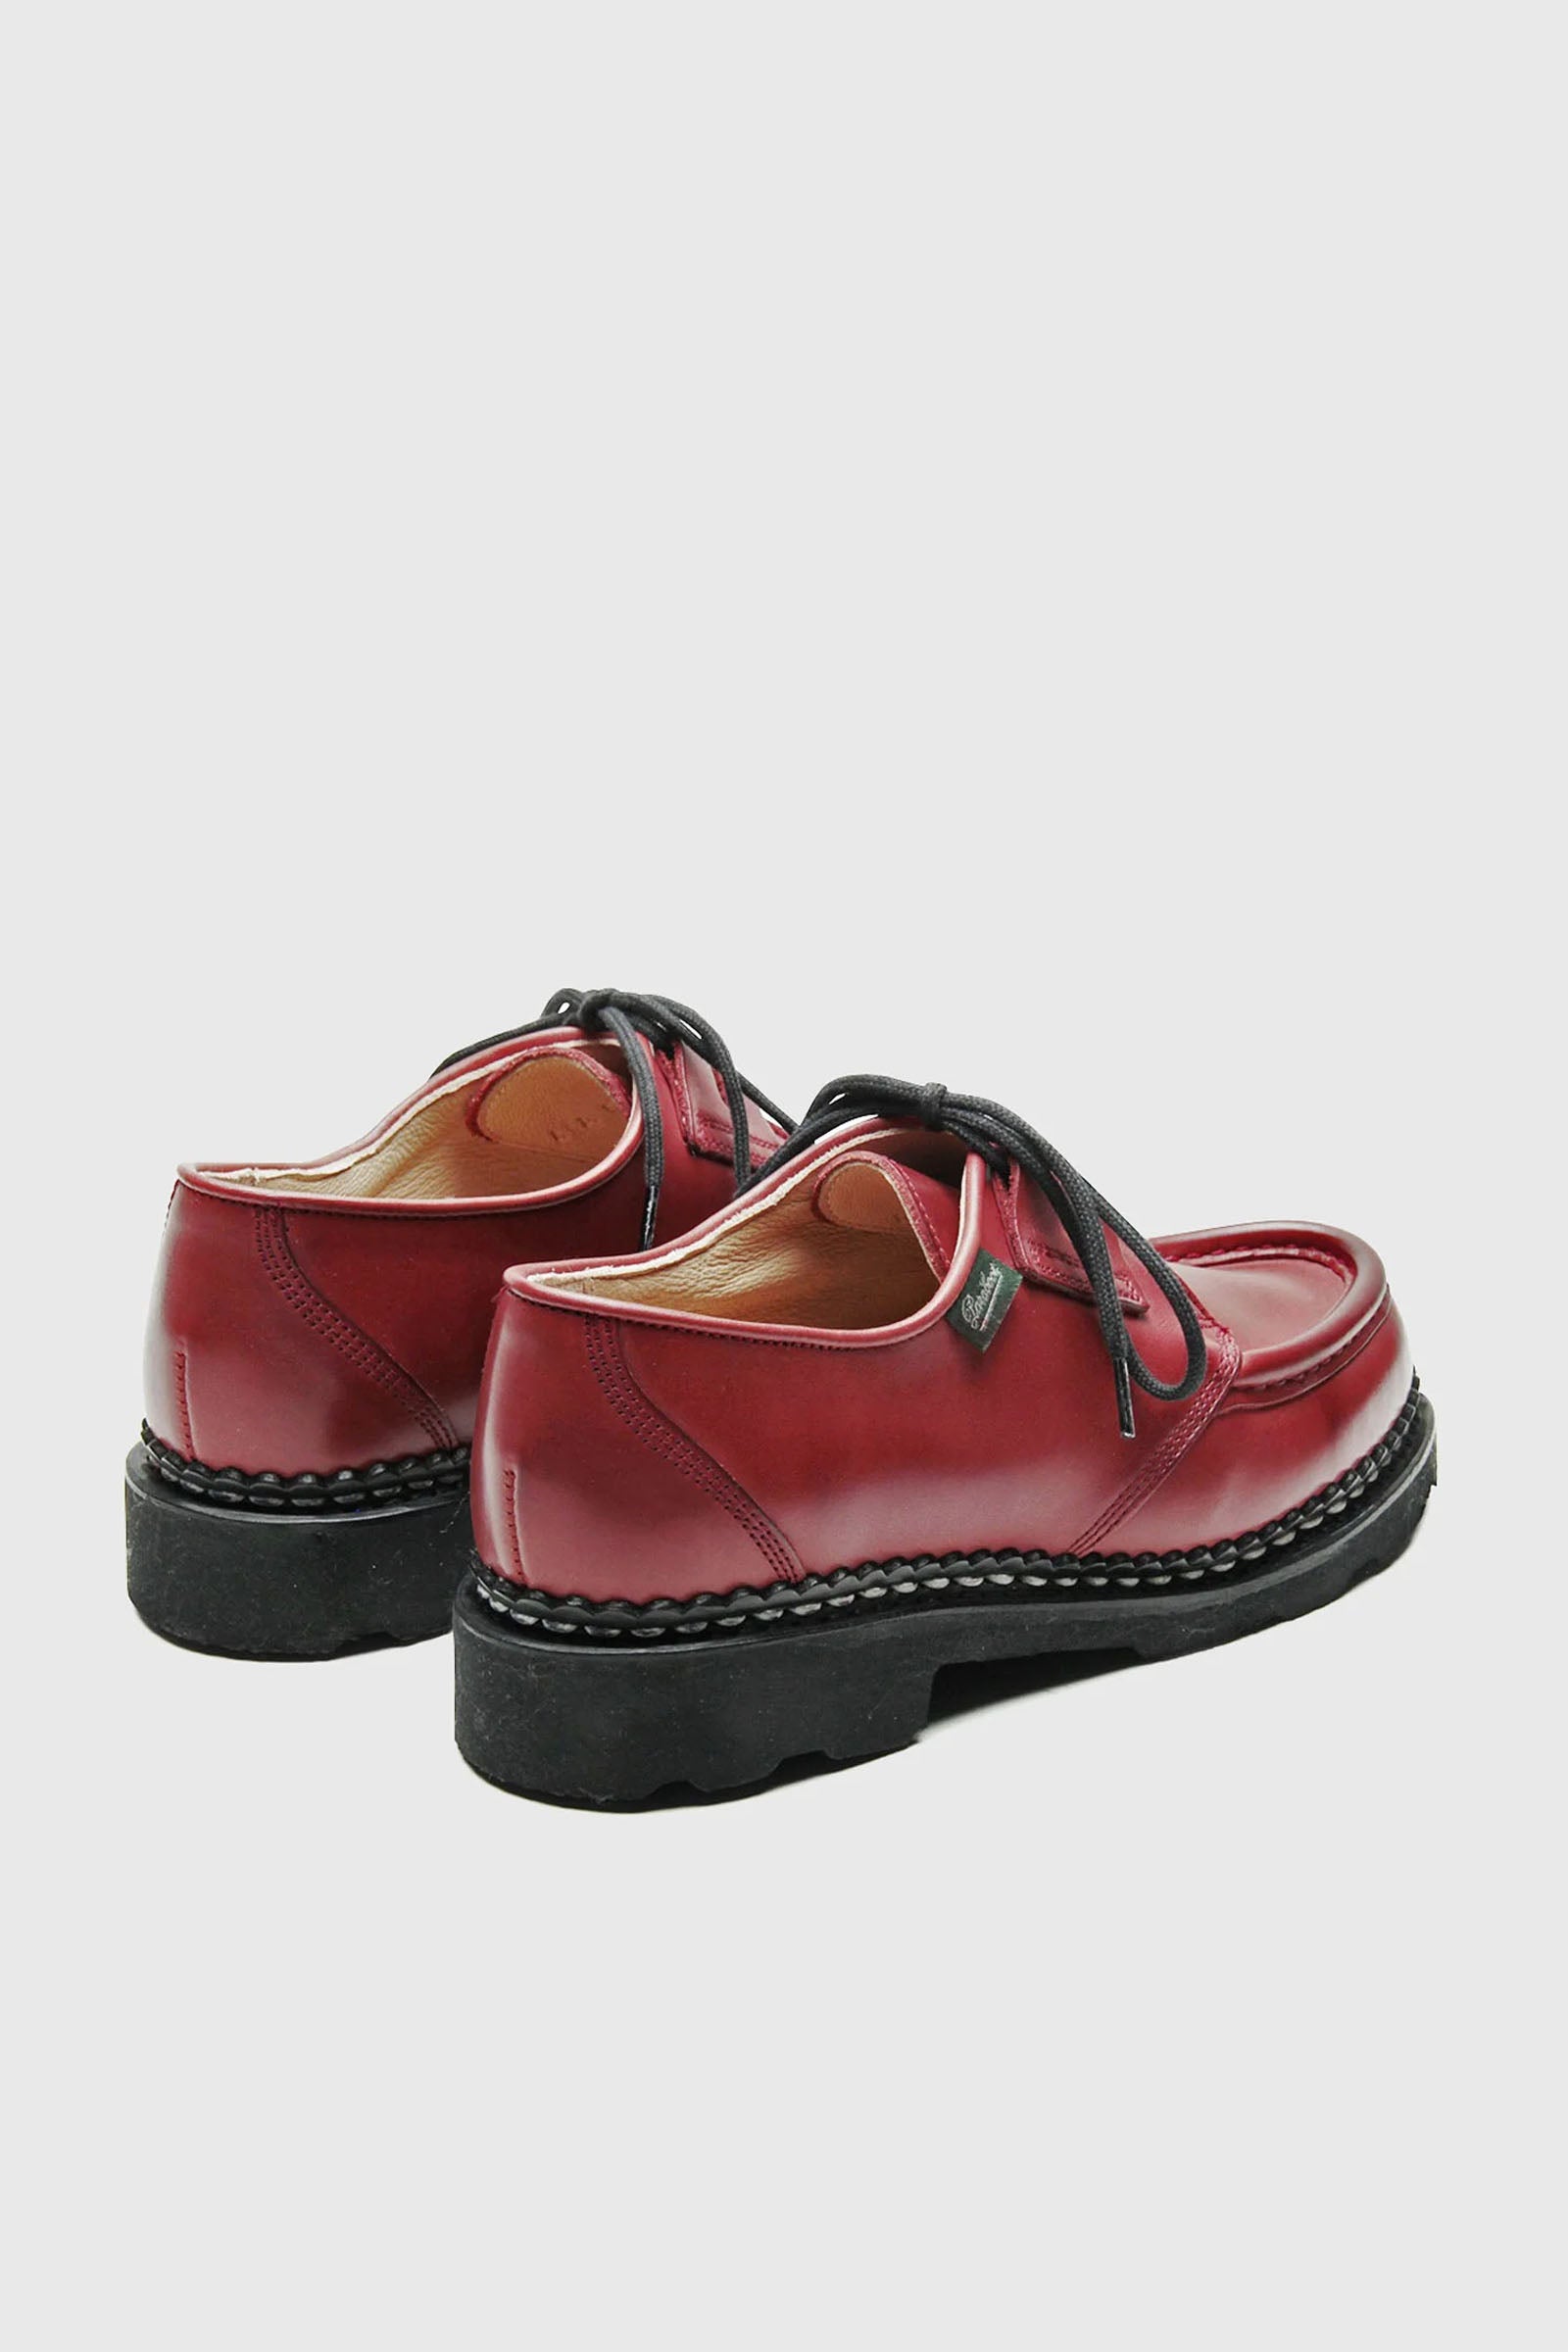 Beaubourg Lisse Rouge Derby Shoes - 3